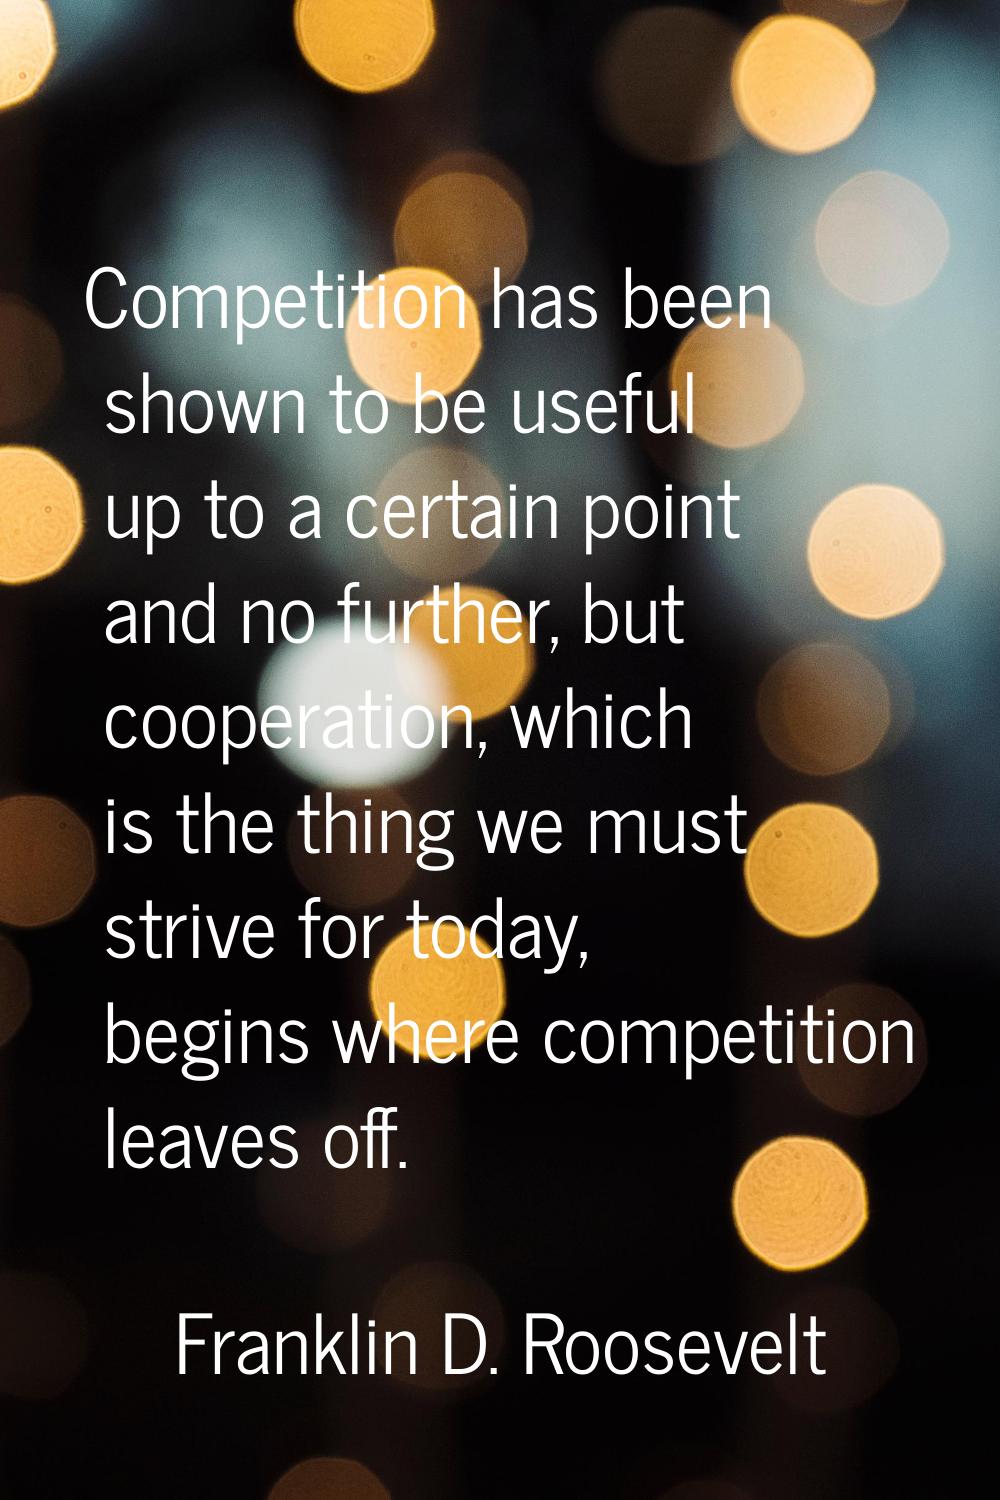 Competition has been shown to be useful up to a certain point and no further, but cooperation, whic